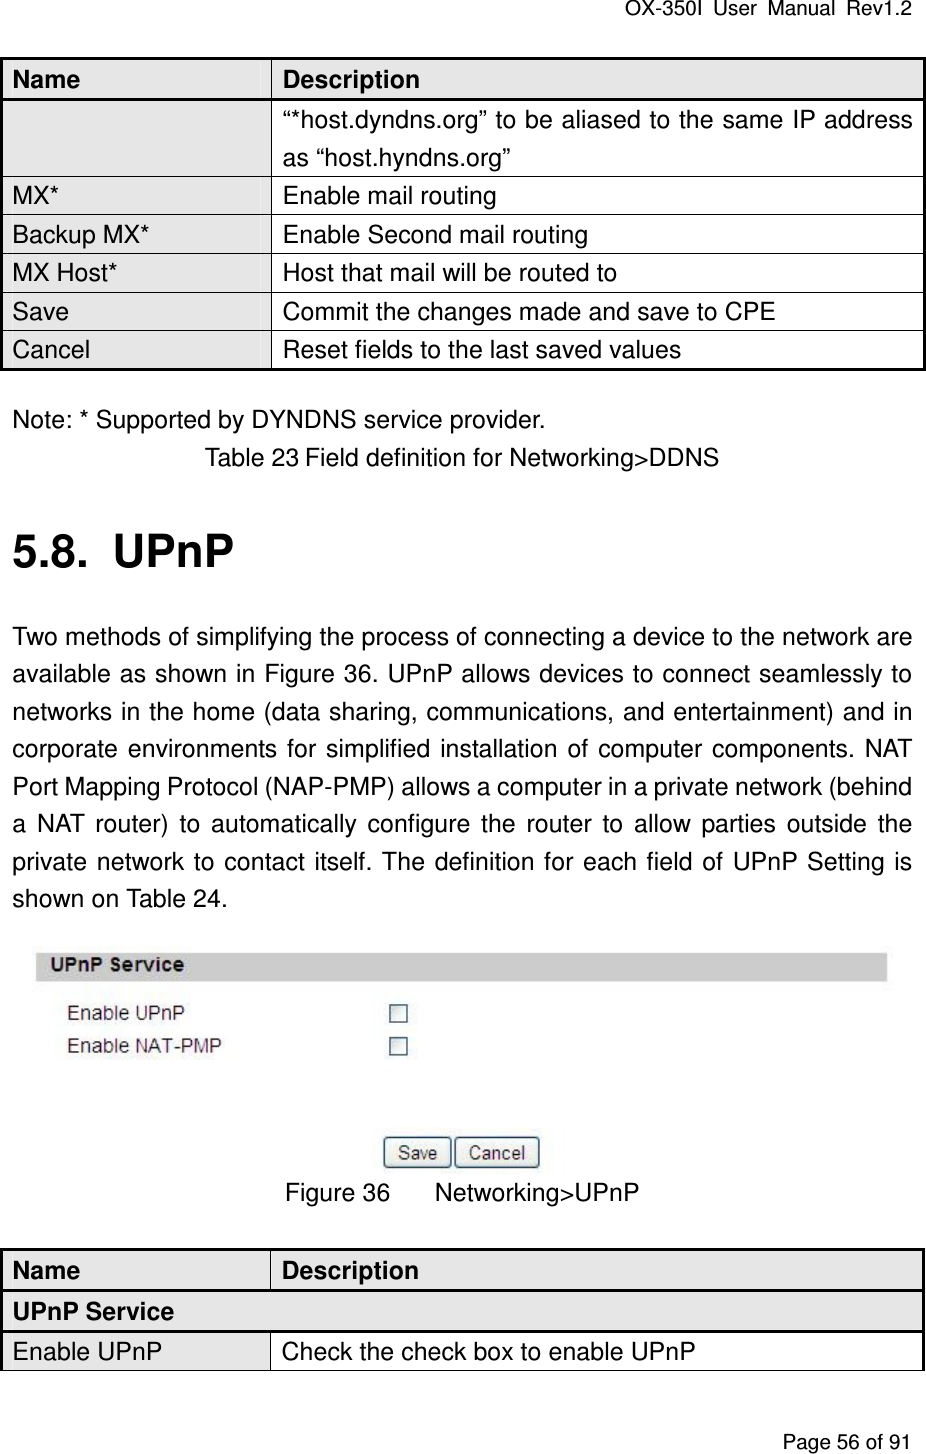 OX-350I  User  Manual  Rev1.2 Page 56 of 91 Name  Description “*host.dyndns.org” to be aliased to the same IP address as “host.hyndns.org” MX*  Enable mail routing Backup MX*  Enable Second mail routing MX Host*  Host that mail will be routed to Save  Commit the changes made and save to CPE Cancel  Reset fields to the last saved values Note: * Supported by DYNDNS service provider. Table 23 Field definition for Networking&gt;DDNS 5.8.  UPnP Two methods of simplifying the process of connecting a device to the network are available as shown in Figure 36. UPnP allows devices to connect seamlessly to networks in the home (data sharing, communications, and entertainment) and in corporate  environments for simplified  installation of computer components. NAT Port Mapping Protocol (NAP-PMP) allows a computer in a private network (behind a  NAT  router)  to  automatically  configure  the  router  to  allow  parties  outside  the private network to contact itself. The definition for each field of UPnP Setting is shown on Table 24.  Figure 36  Networking&gt;UPnP Name  Description UPnP Service Enable UPnP  Check the check box to enable UPnP 